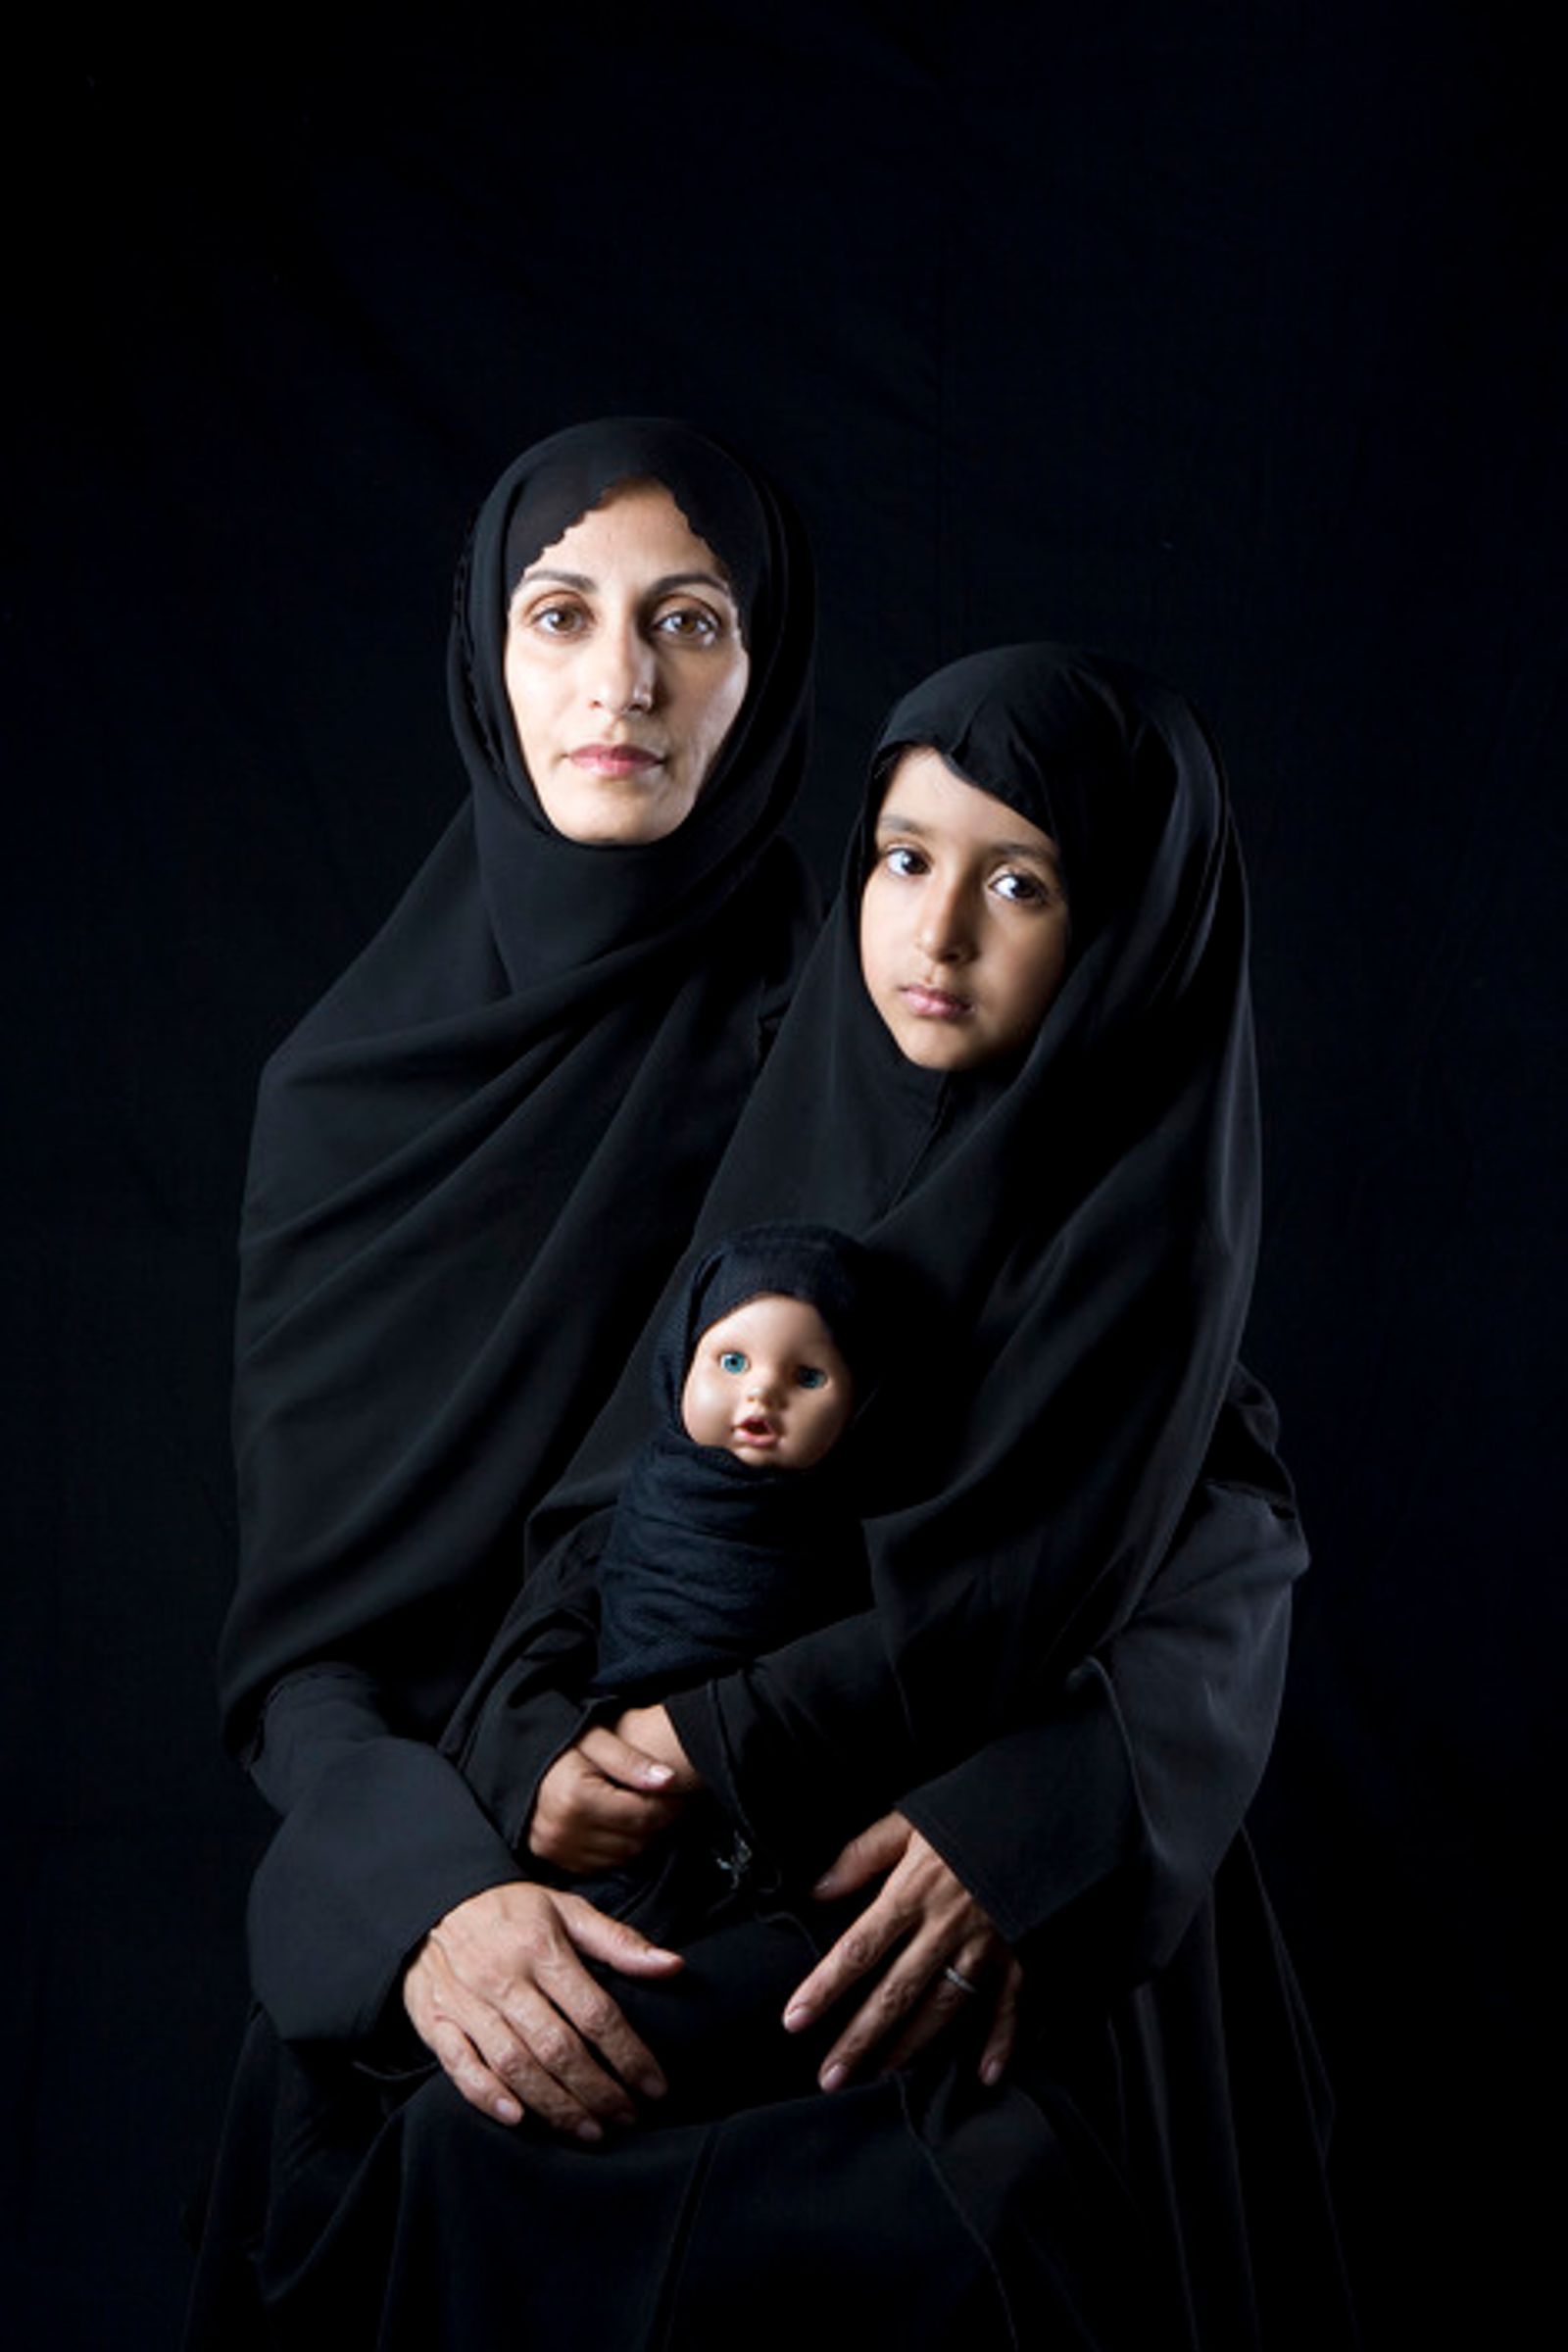 © Boushra Almutawakel - Image from the The Hijab Series photography project